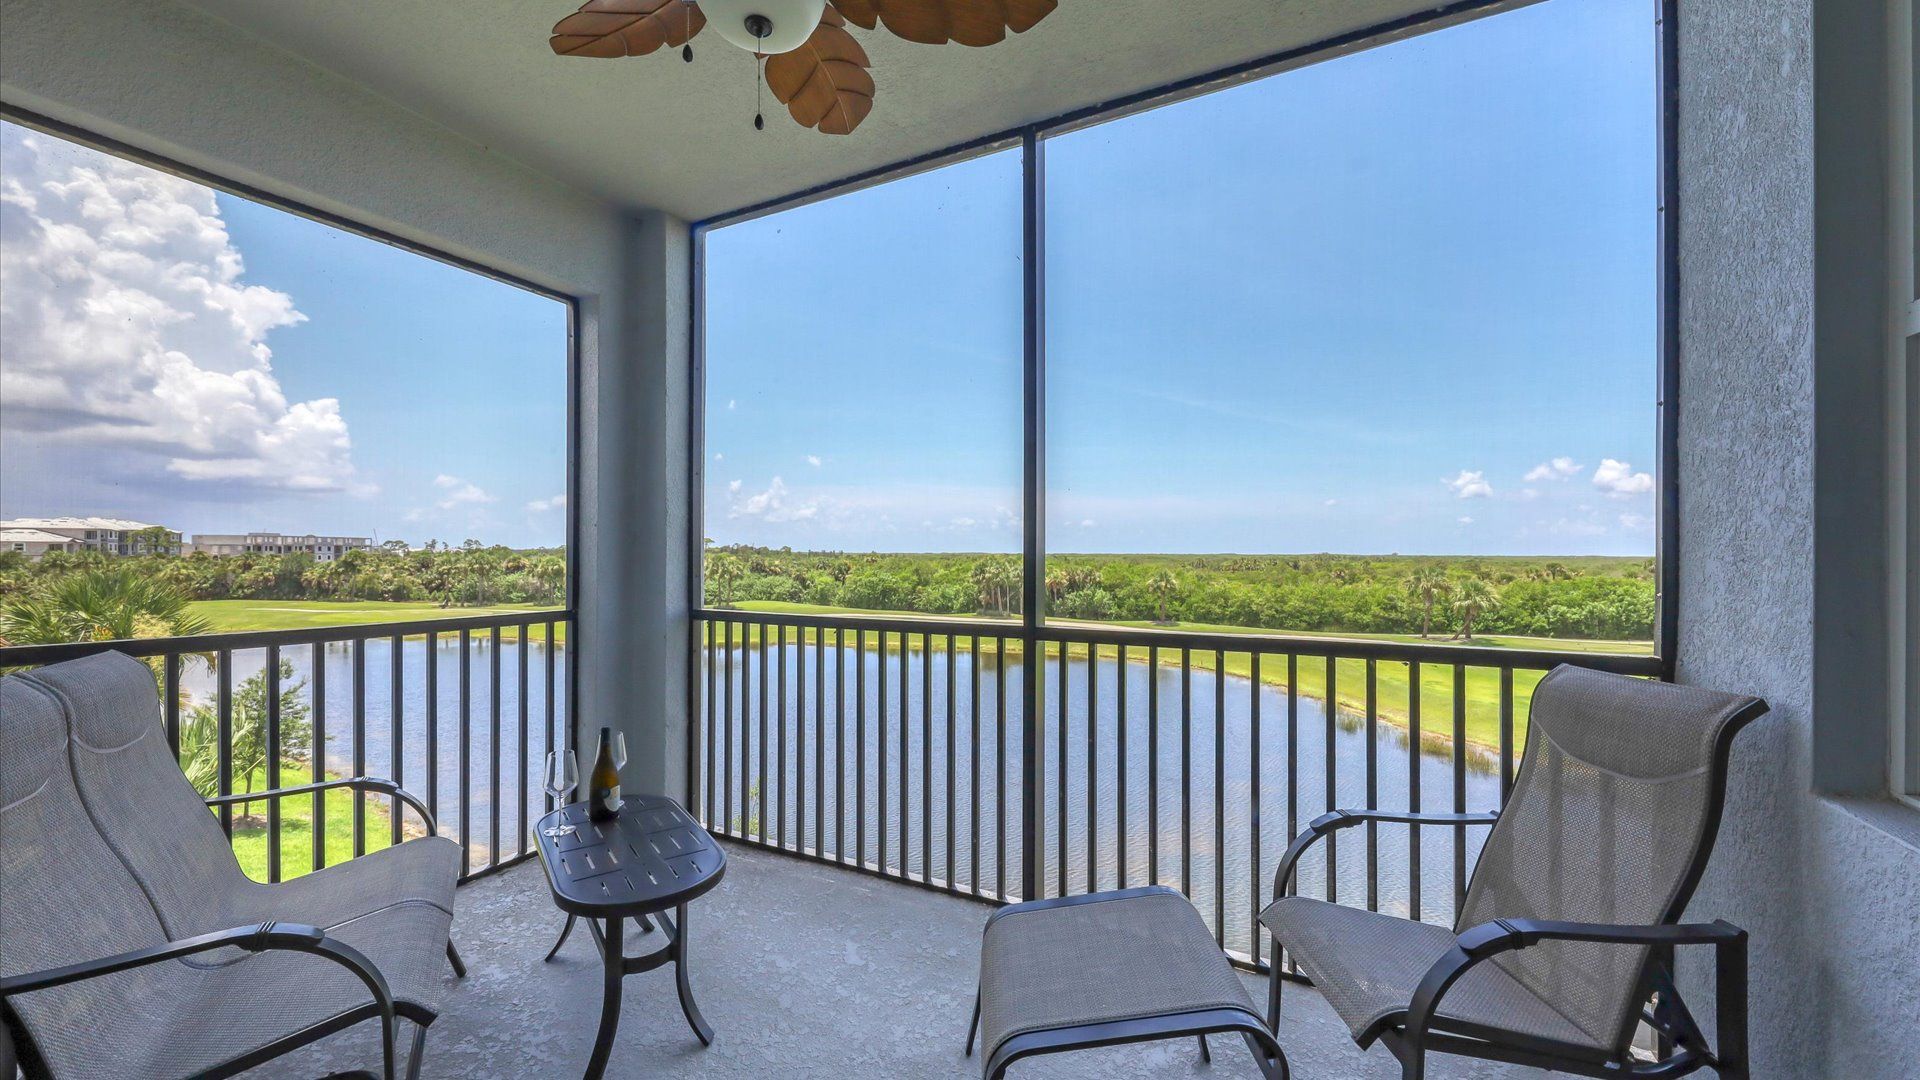 Enjoy beautiful sunsets from this gorgeous third-floor condo overlooking the protected wetlands leading out to the Gulf
Overlooks Hole 11 on the golf course.